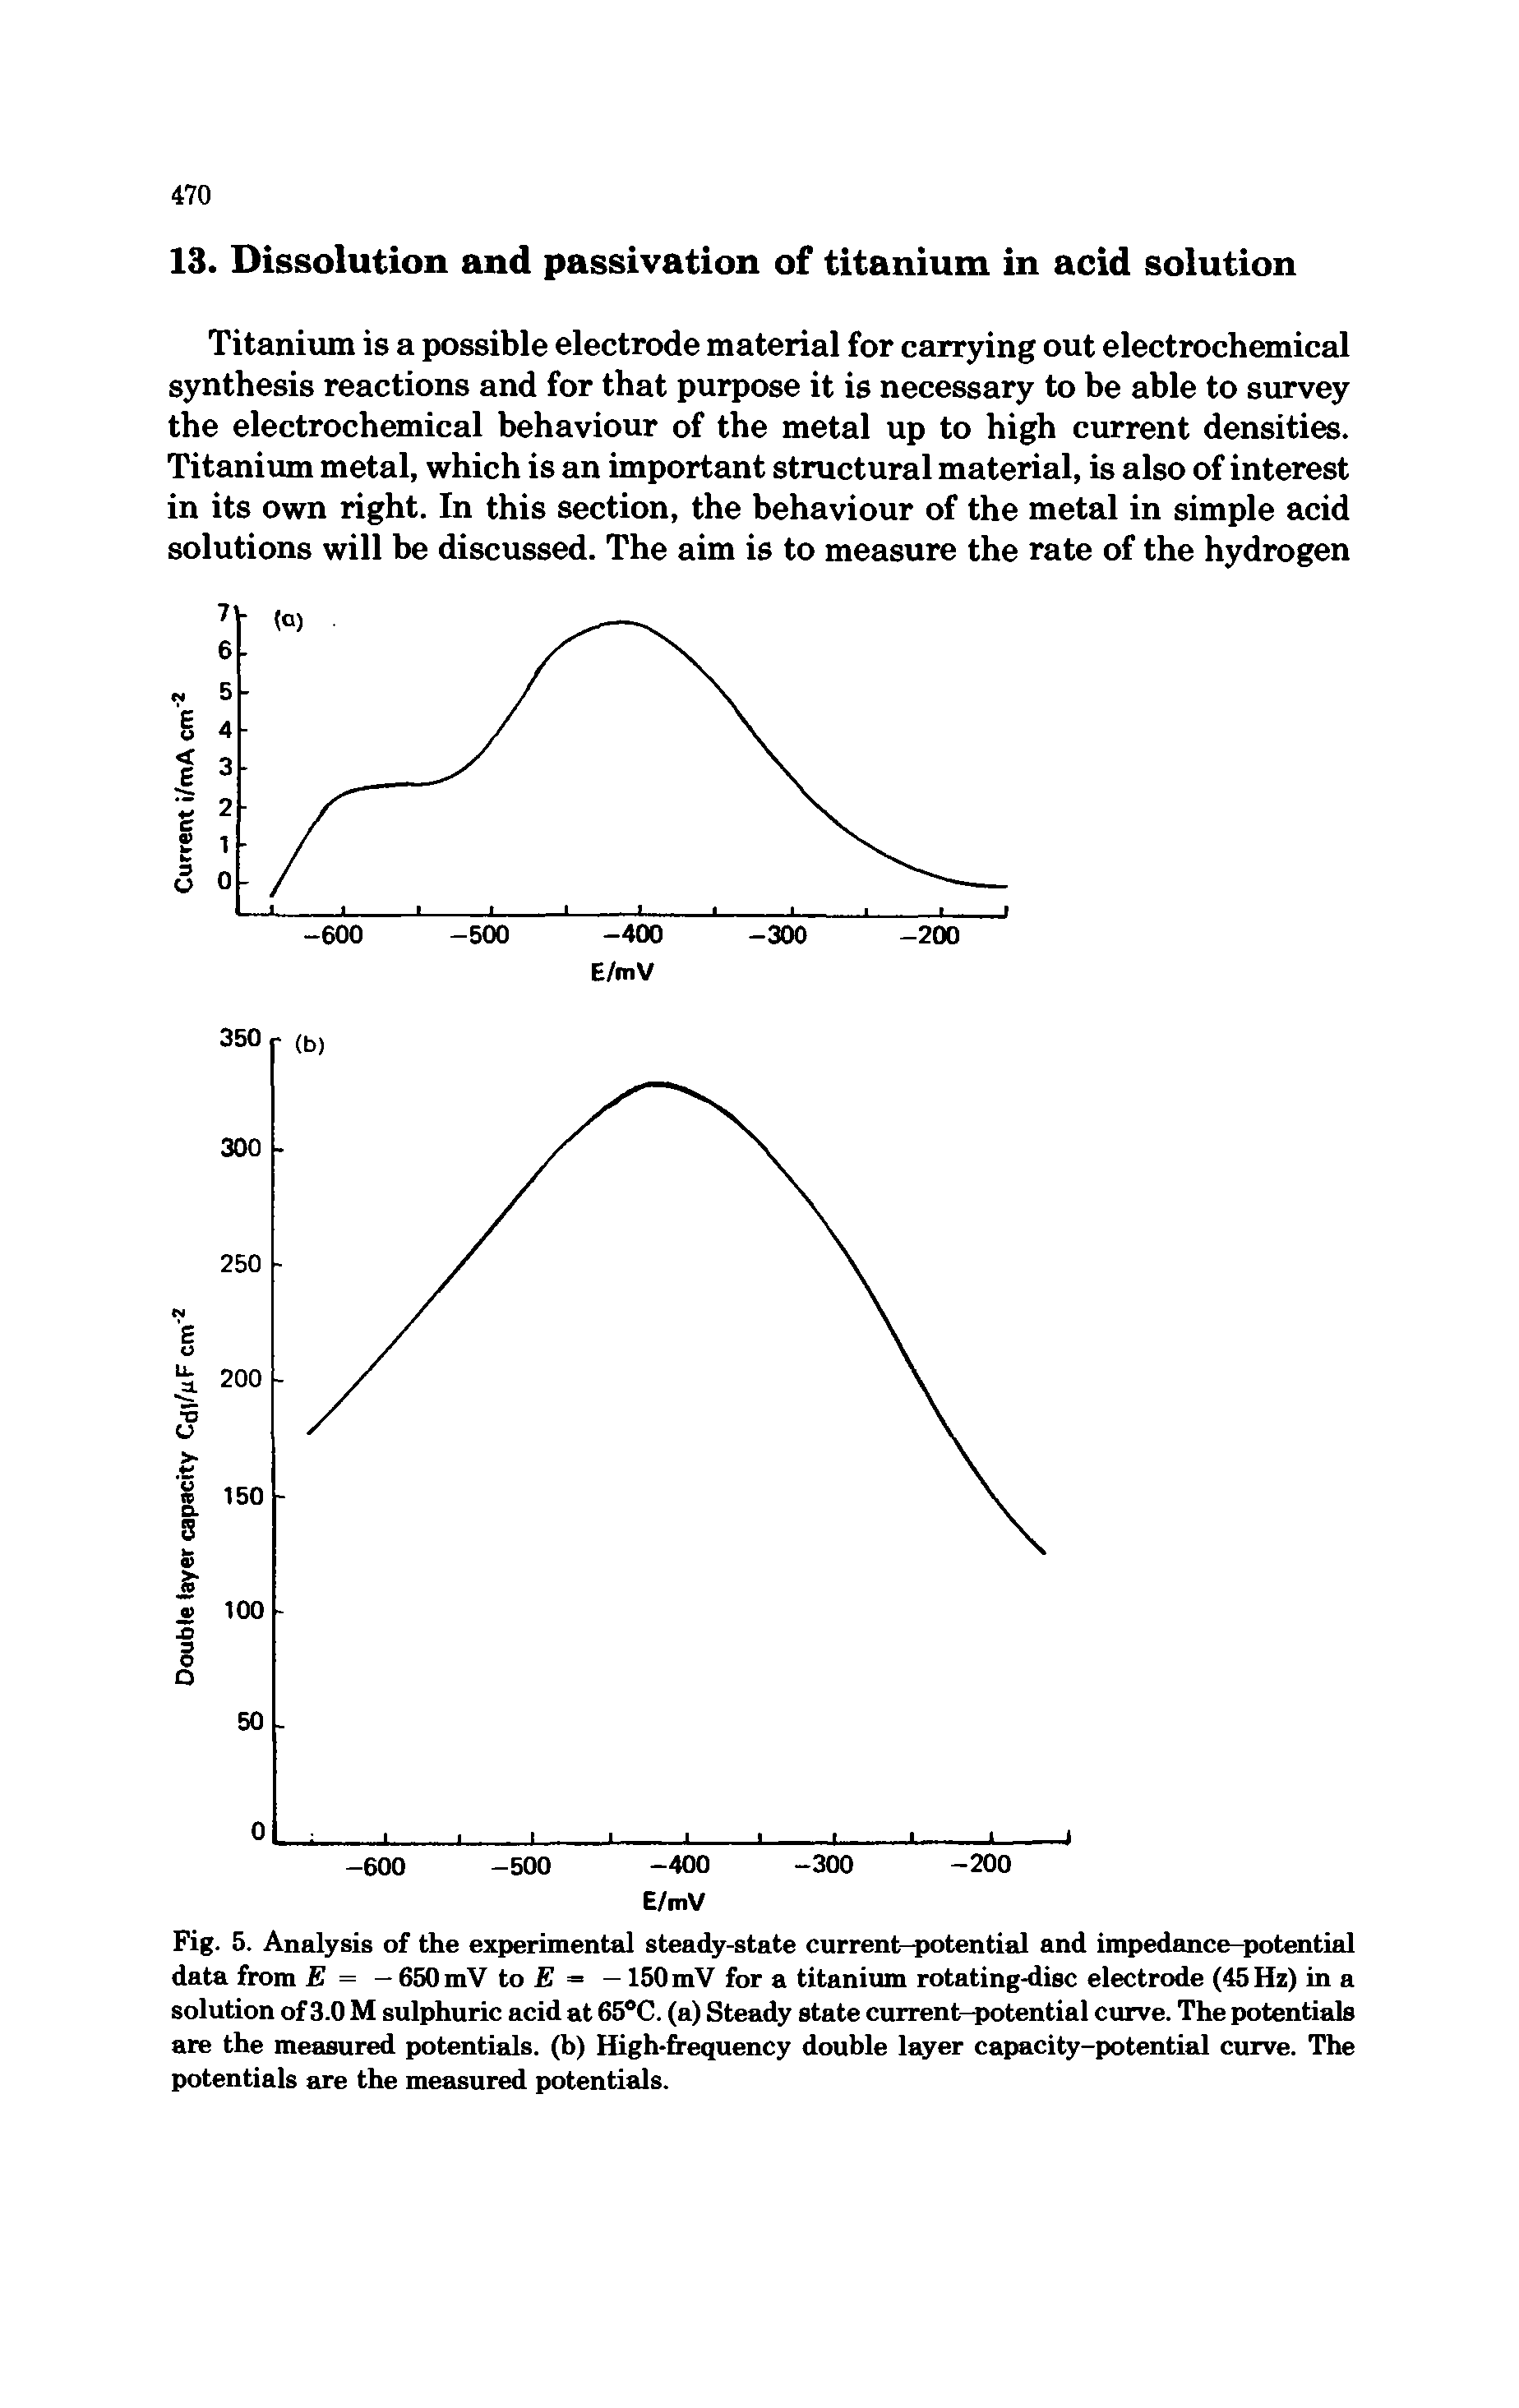 Fig. 5. Analysis of the experimental steady-state current—potential and impedance-potential data from E = — 650 mV to E = —150 mV for a titanium rotating-disc electrode (45 Hz) in a solution of 3.0 M sulphuric acid at 65°C. (a) Steady state current-potential curve. The potentials are the measured potentials, (b) High-frequency double layer capacity-potential curve. The potentials are the measured potentials.